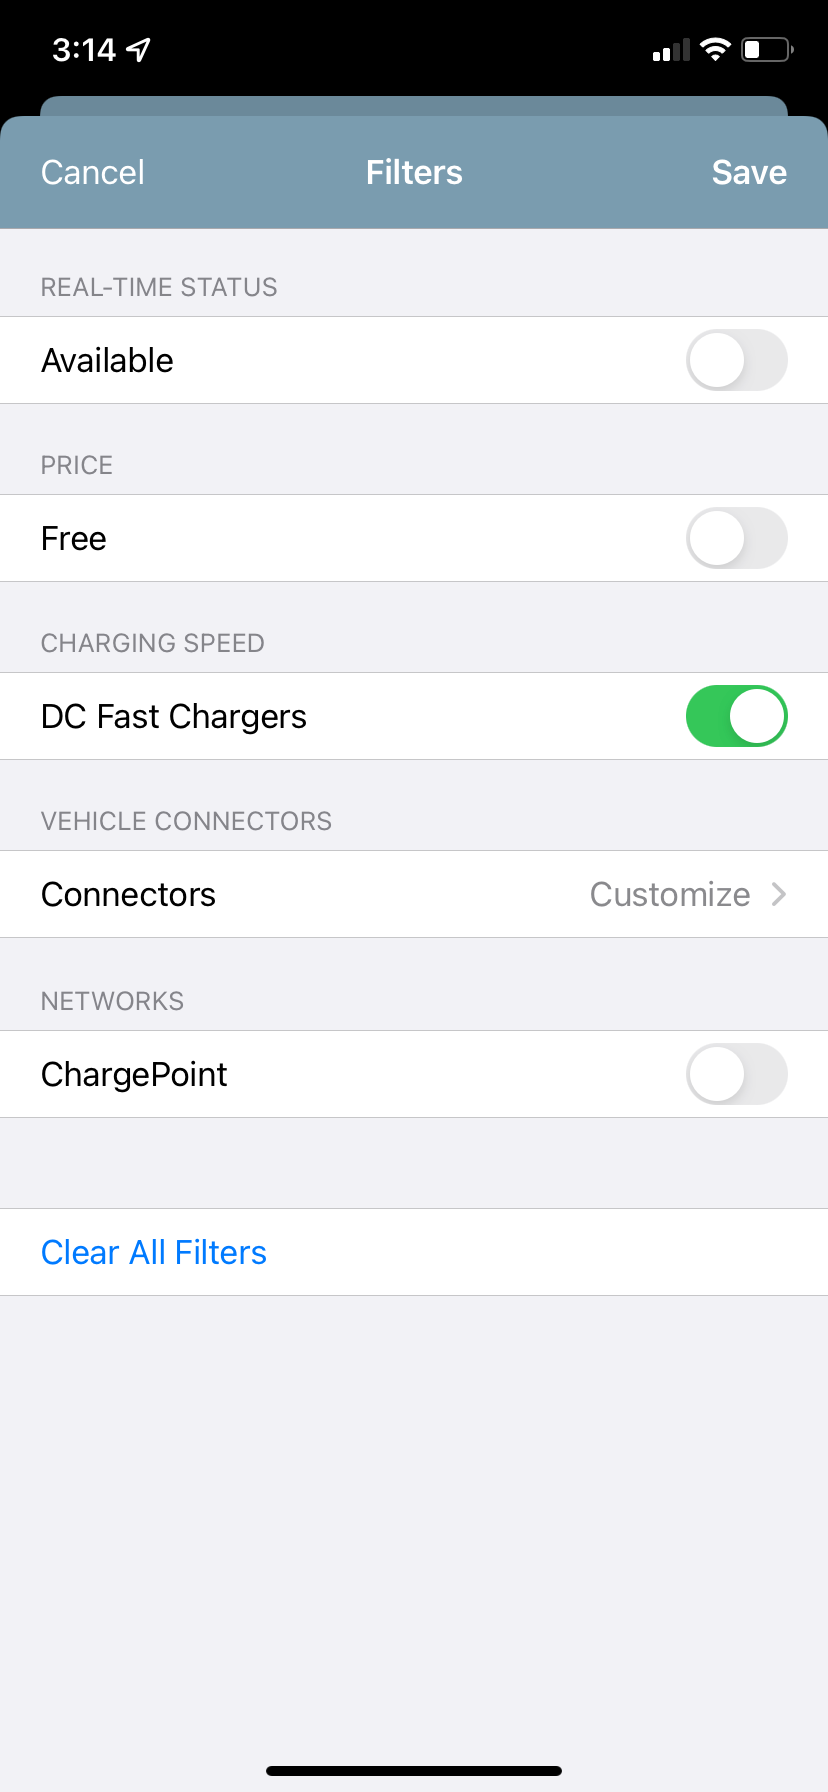 chargepoint app filters dc fast chargers free available ev chargers